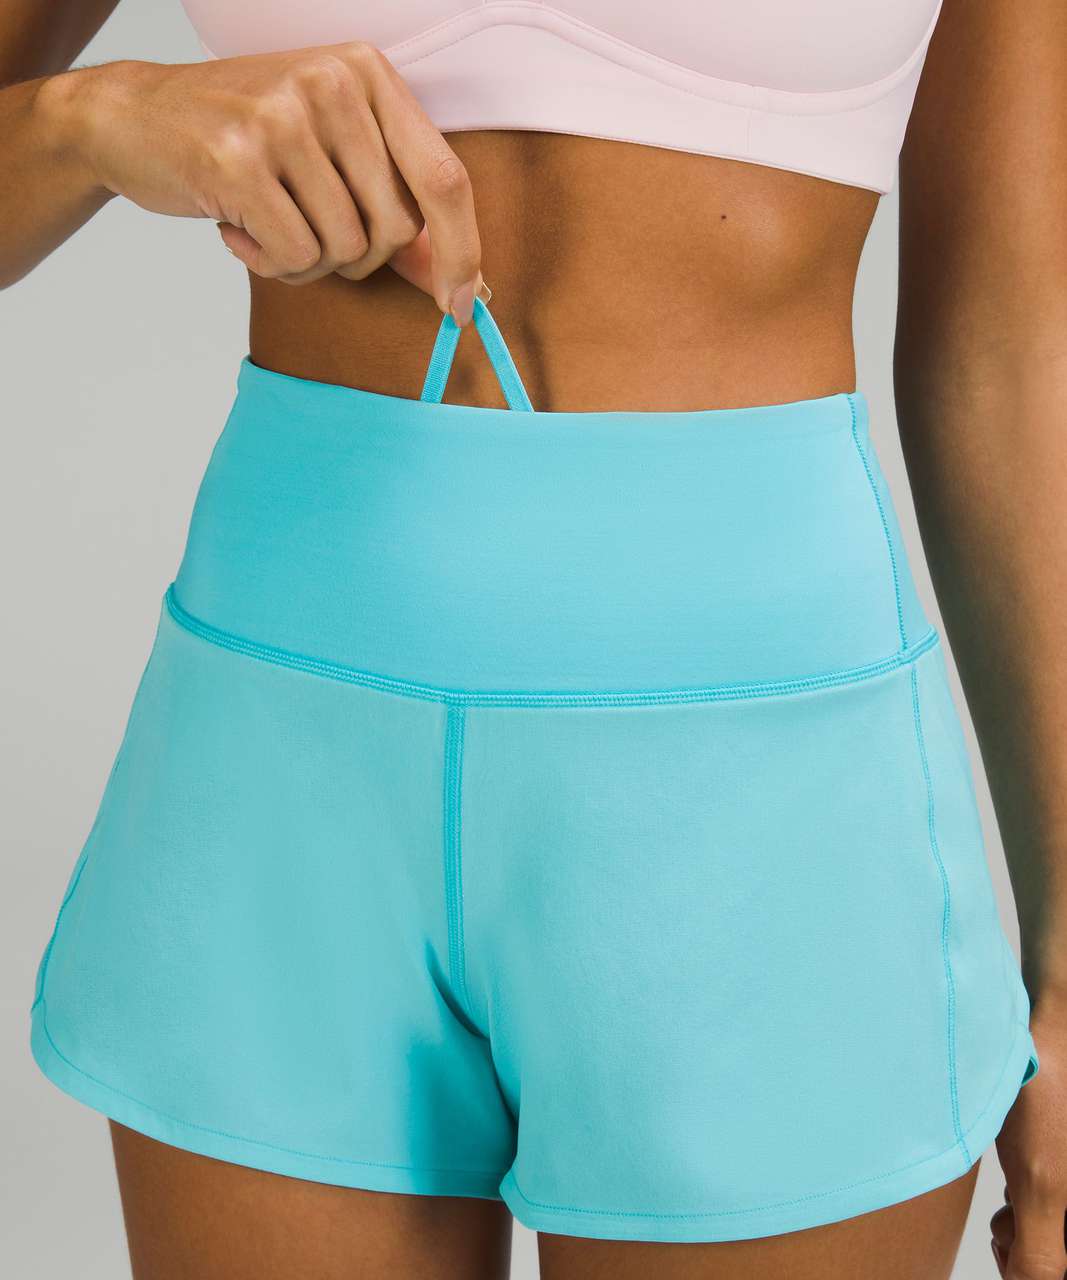 Lululemon Speed Up High-Rise Lined Short 4" - Electric Turquoise